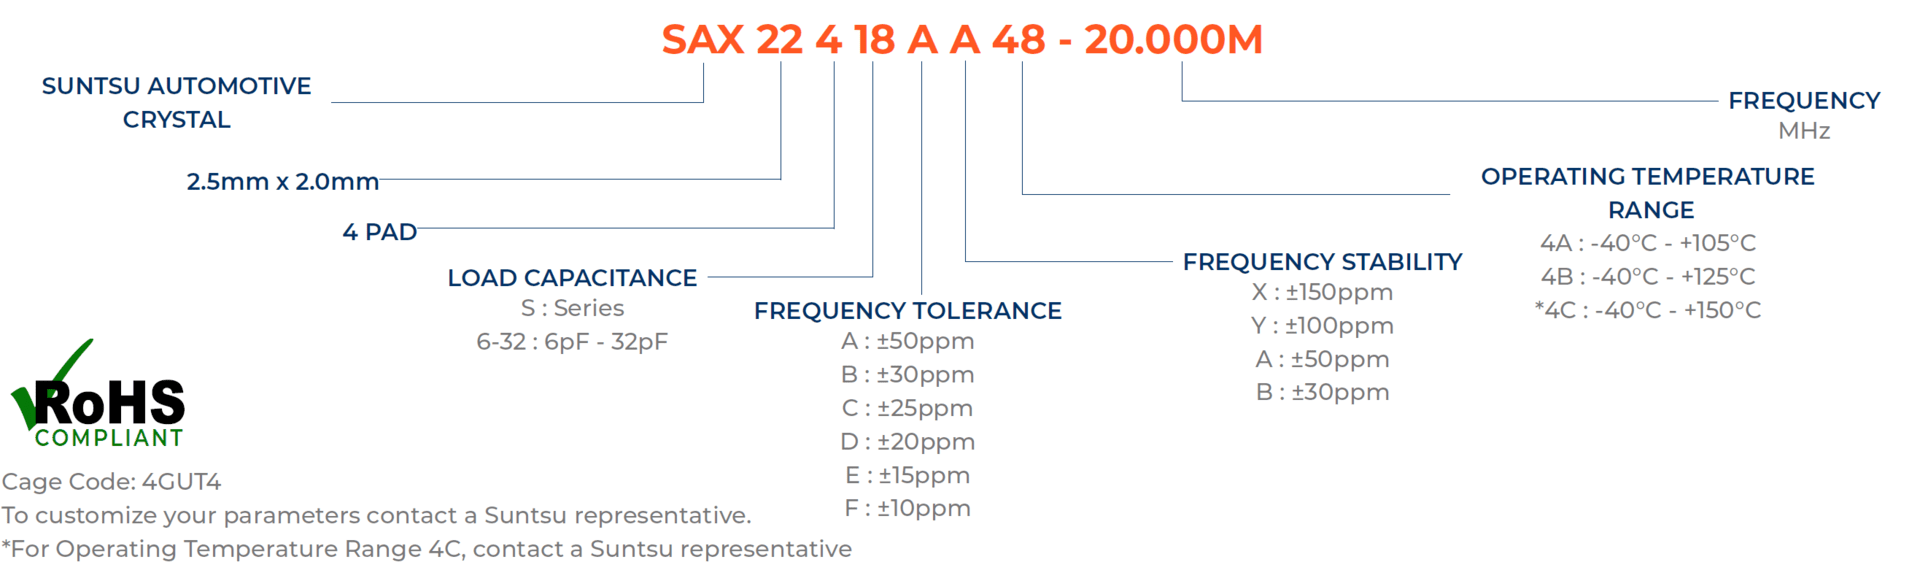 SAX224-Part-Numbering-Guide